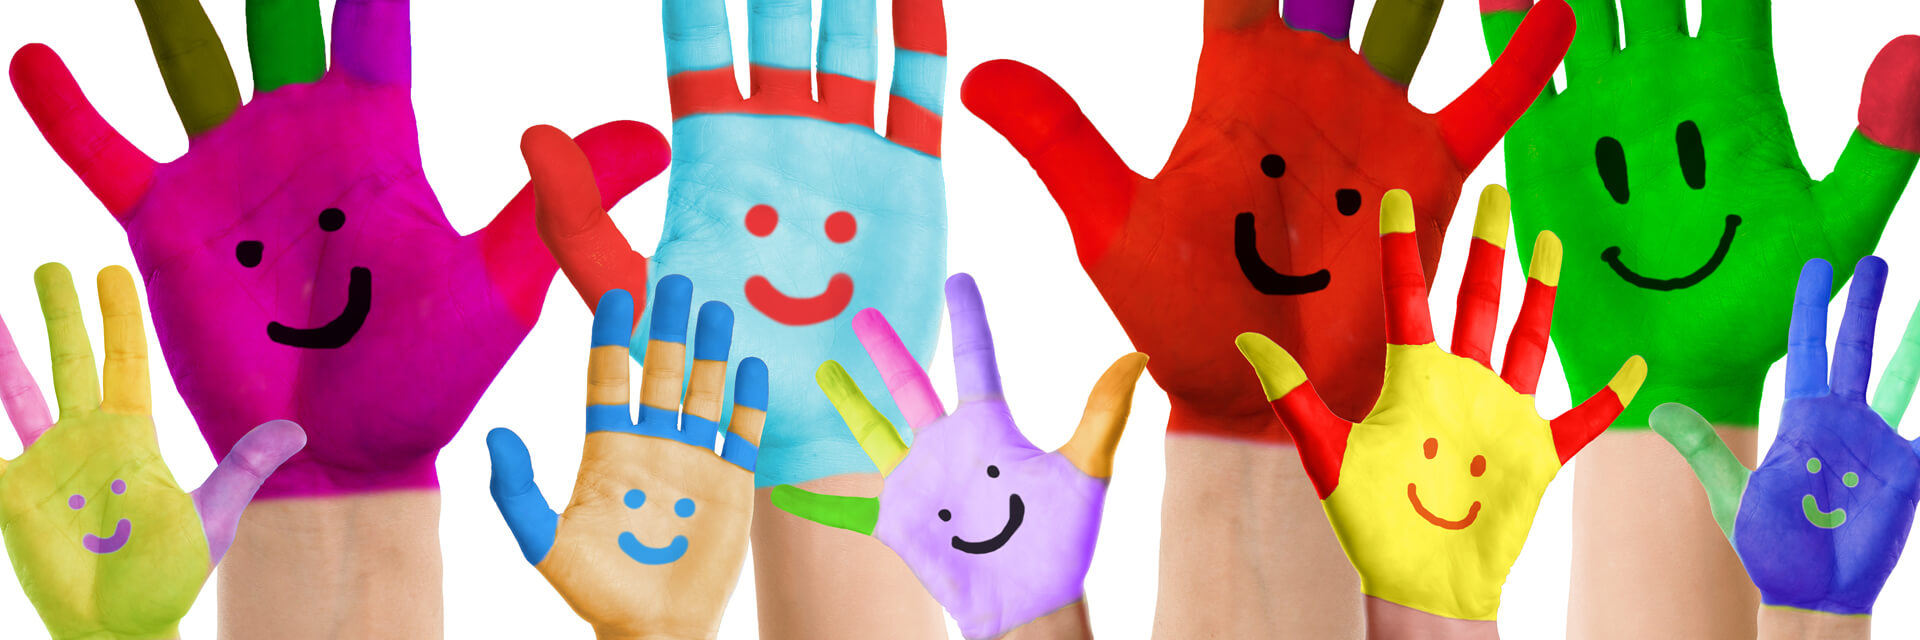 Many different hands coloured with smiley faces